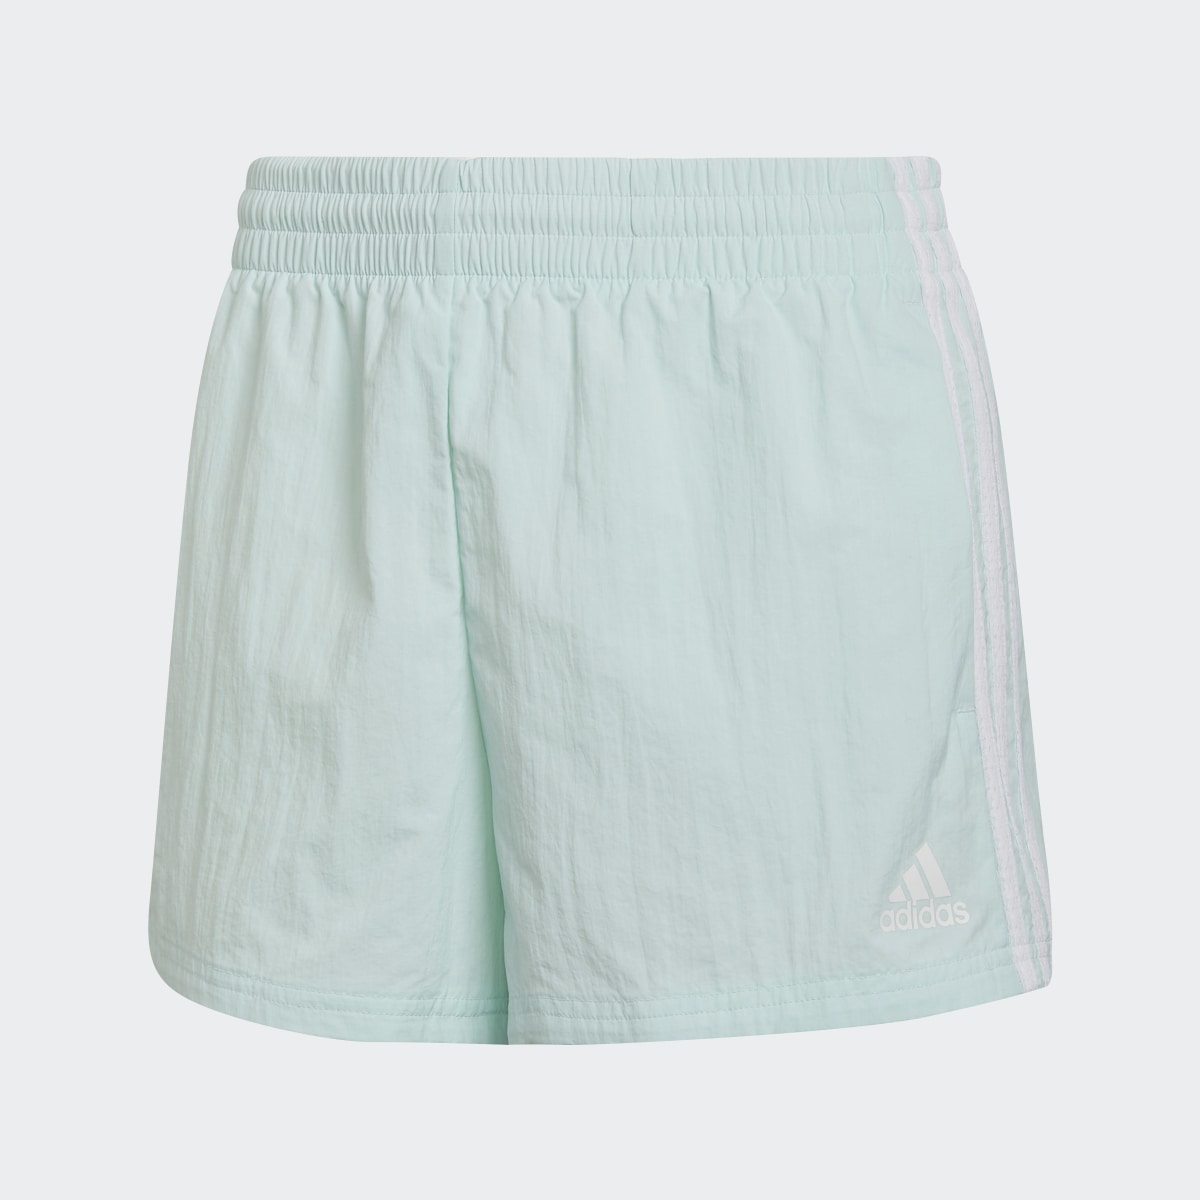 Adidas Short Essentials 3-Stripes Woven (Loose Fit). 5